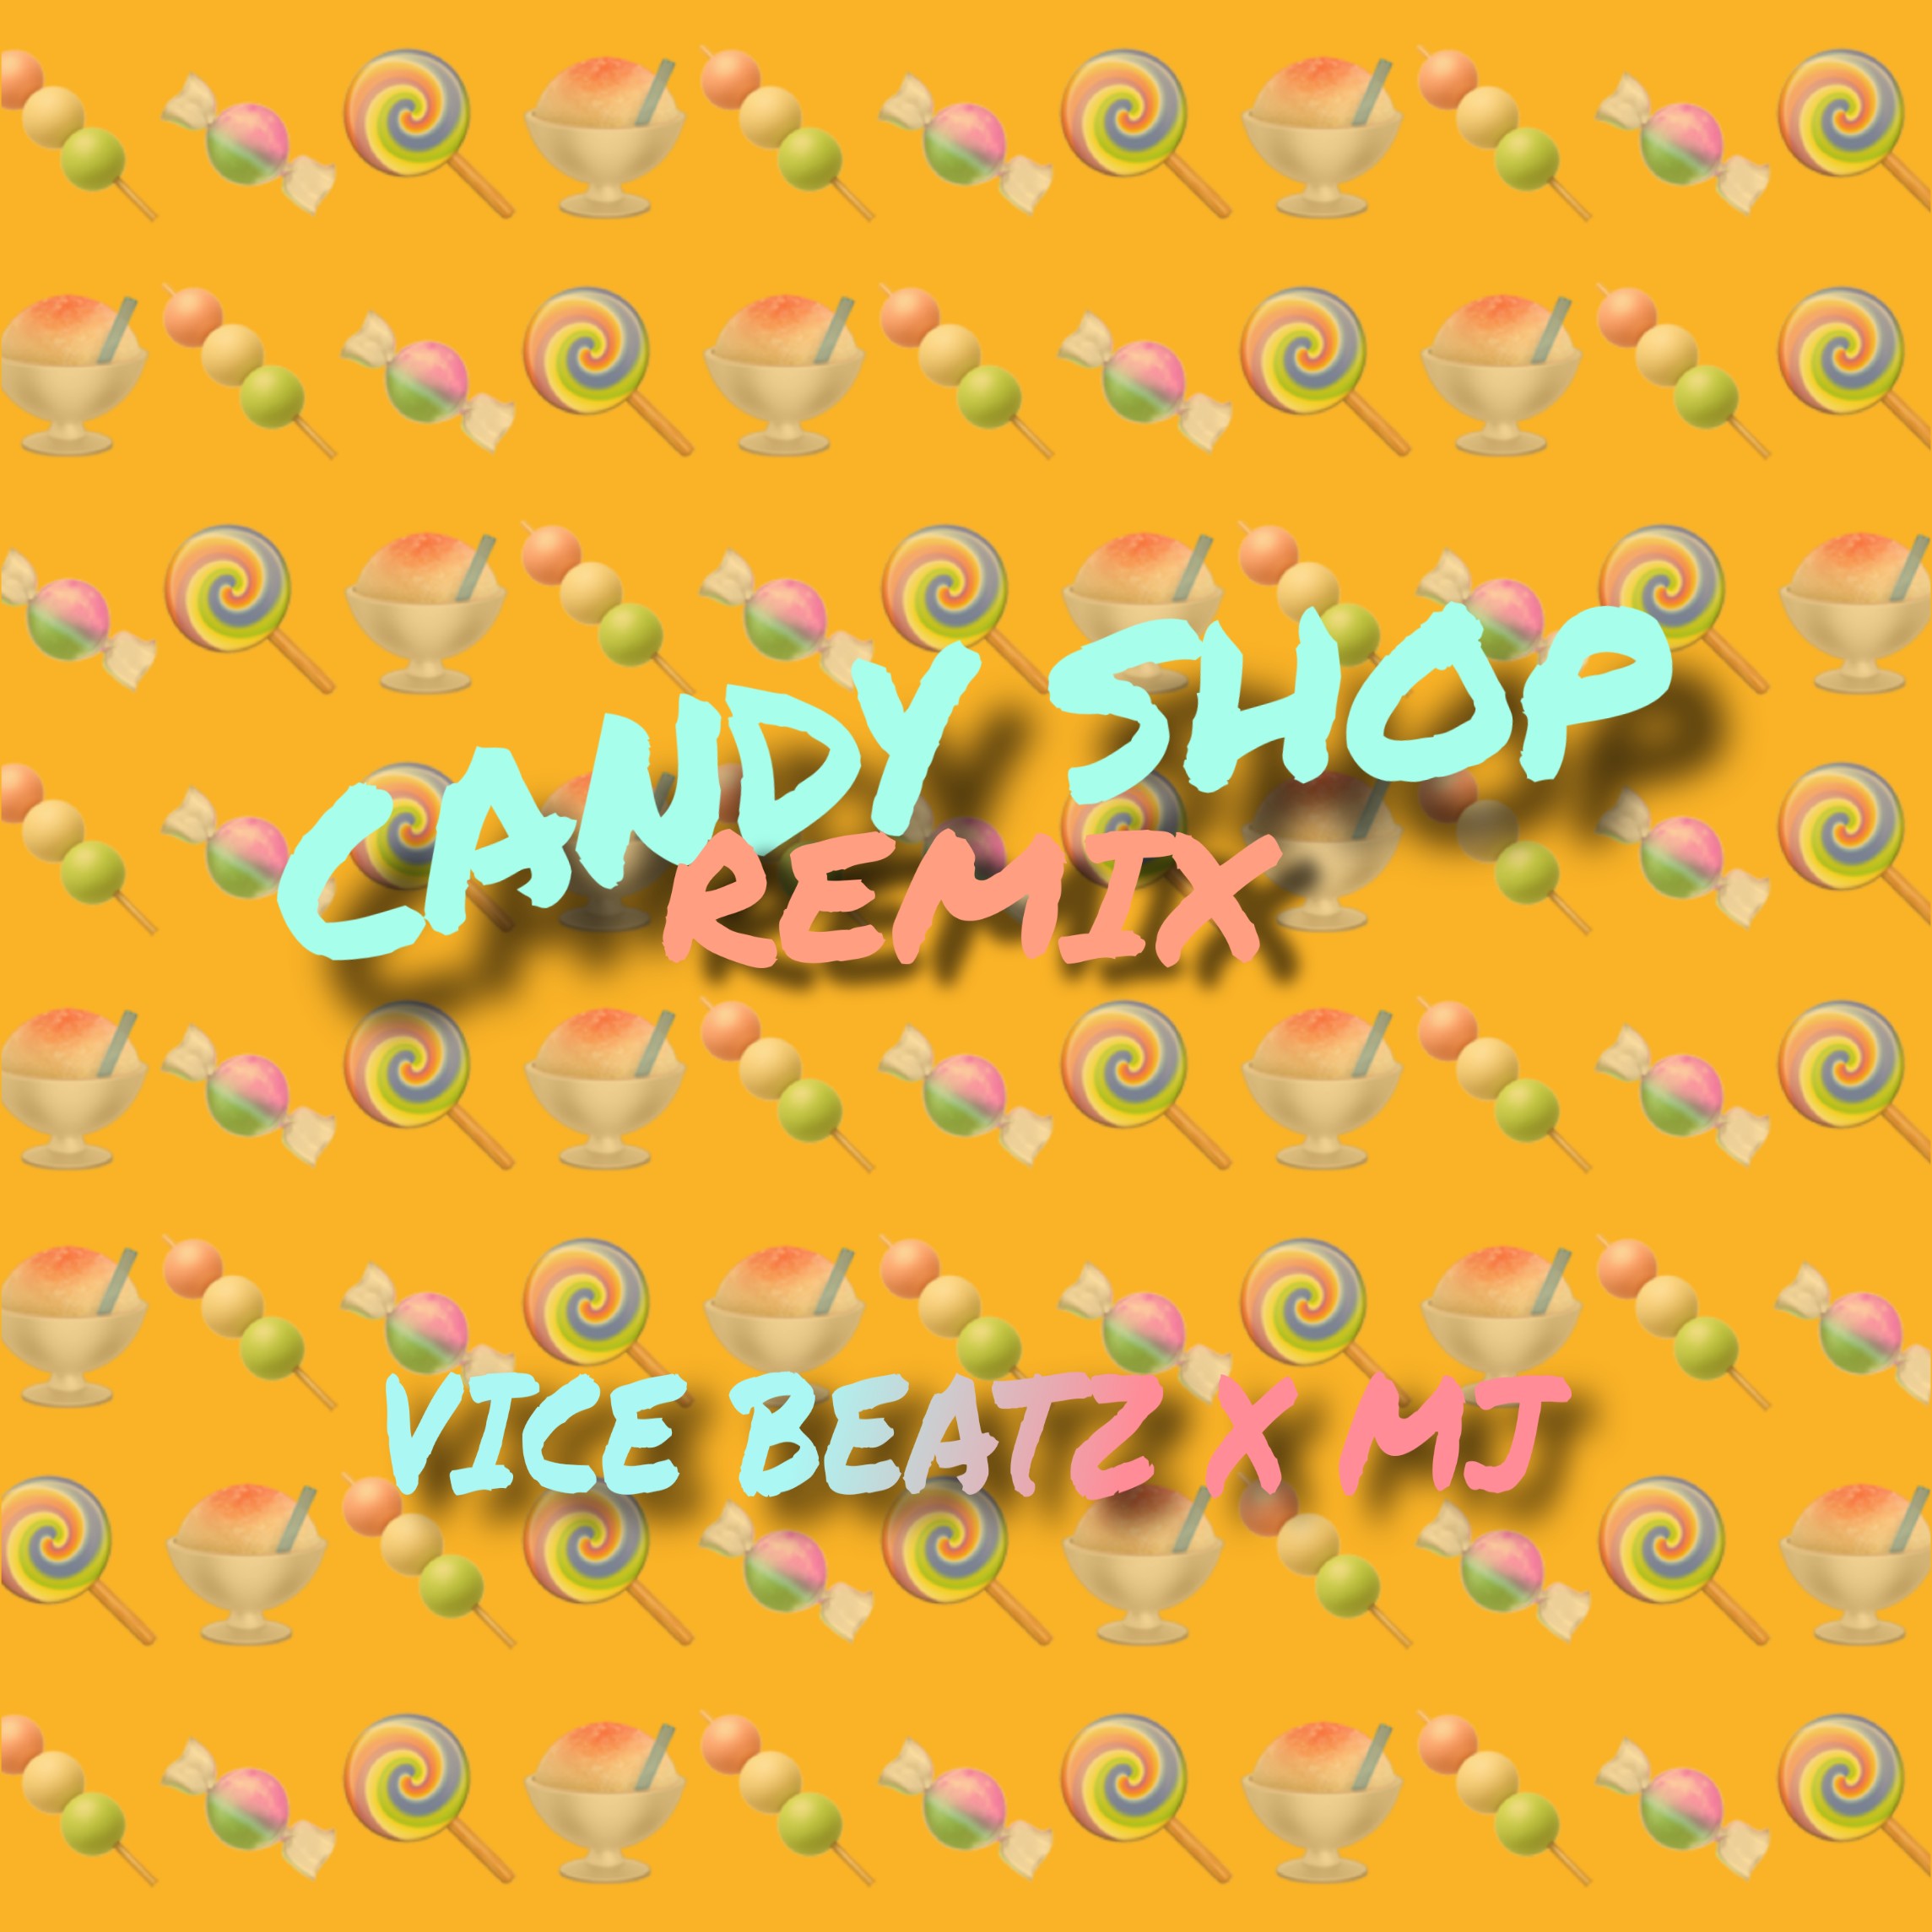 I-download Candy Shop (Vice_Beatz & MJ Remix)_ CLICK ON 'BUY' For Free Download